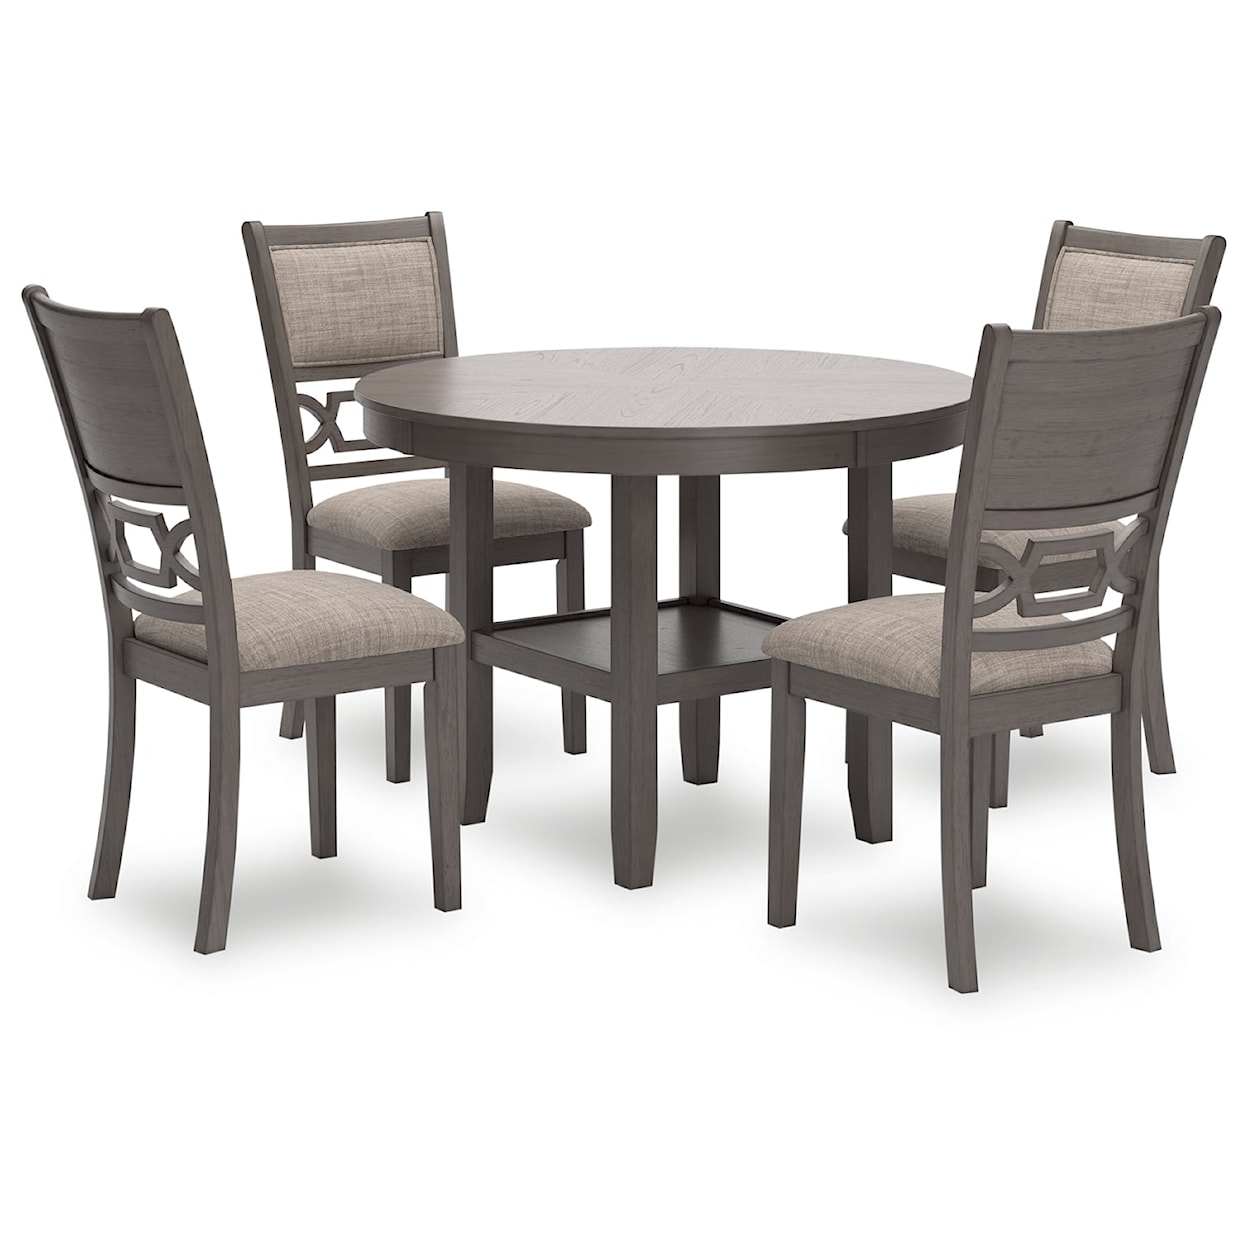 Signature Design by Ashley Wrenning Dining Room Table Set